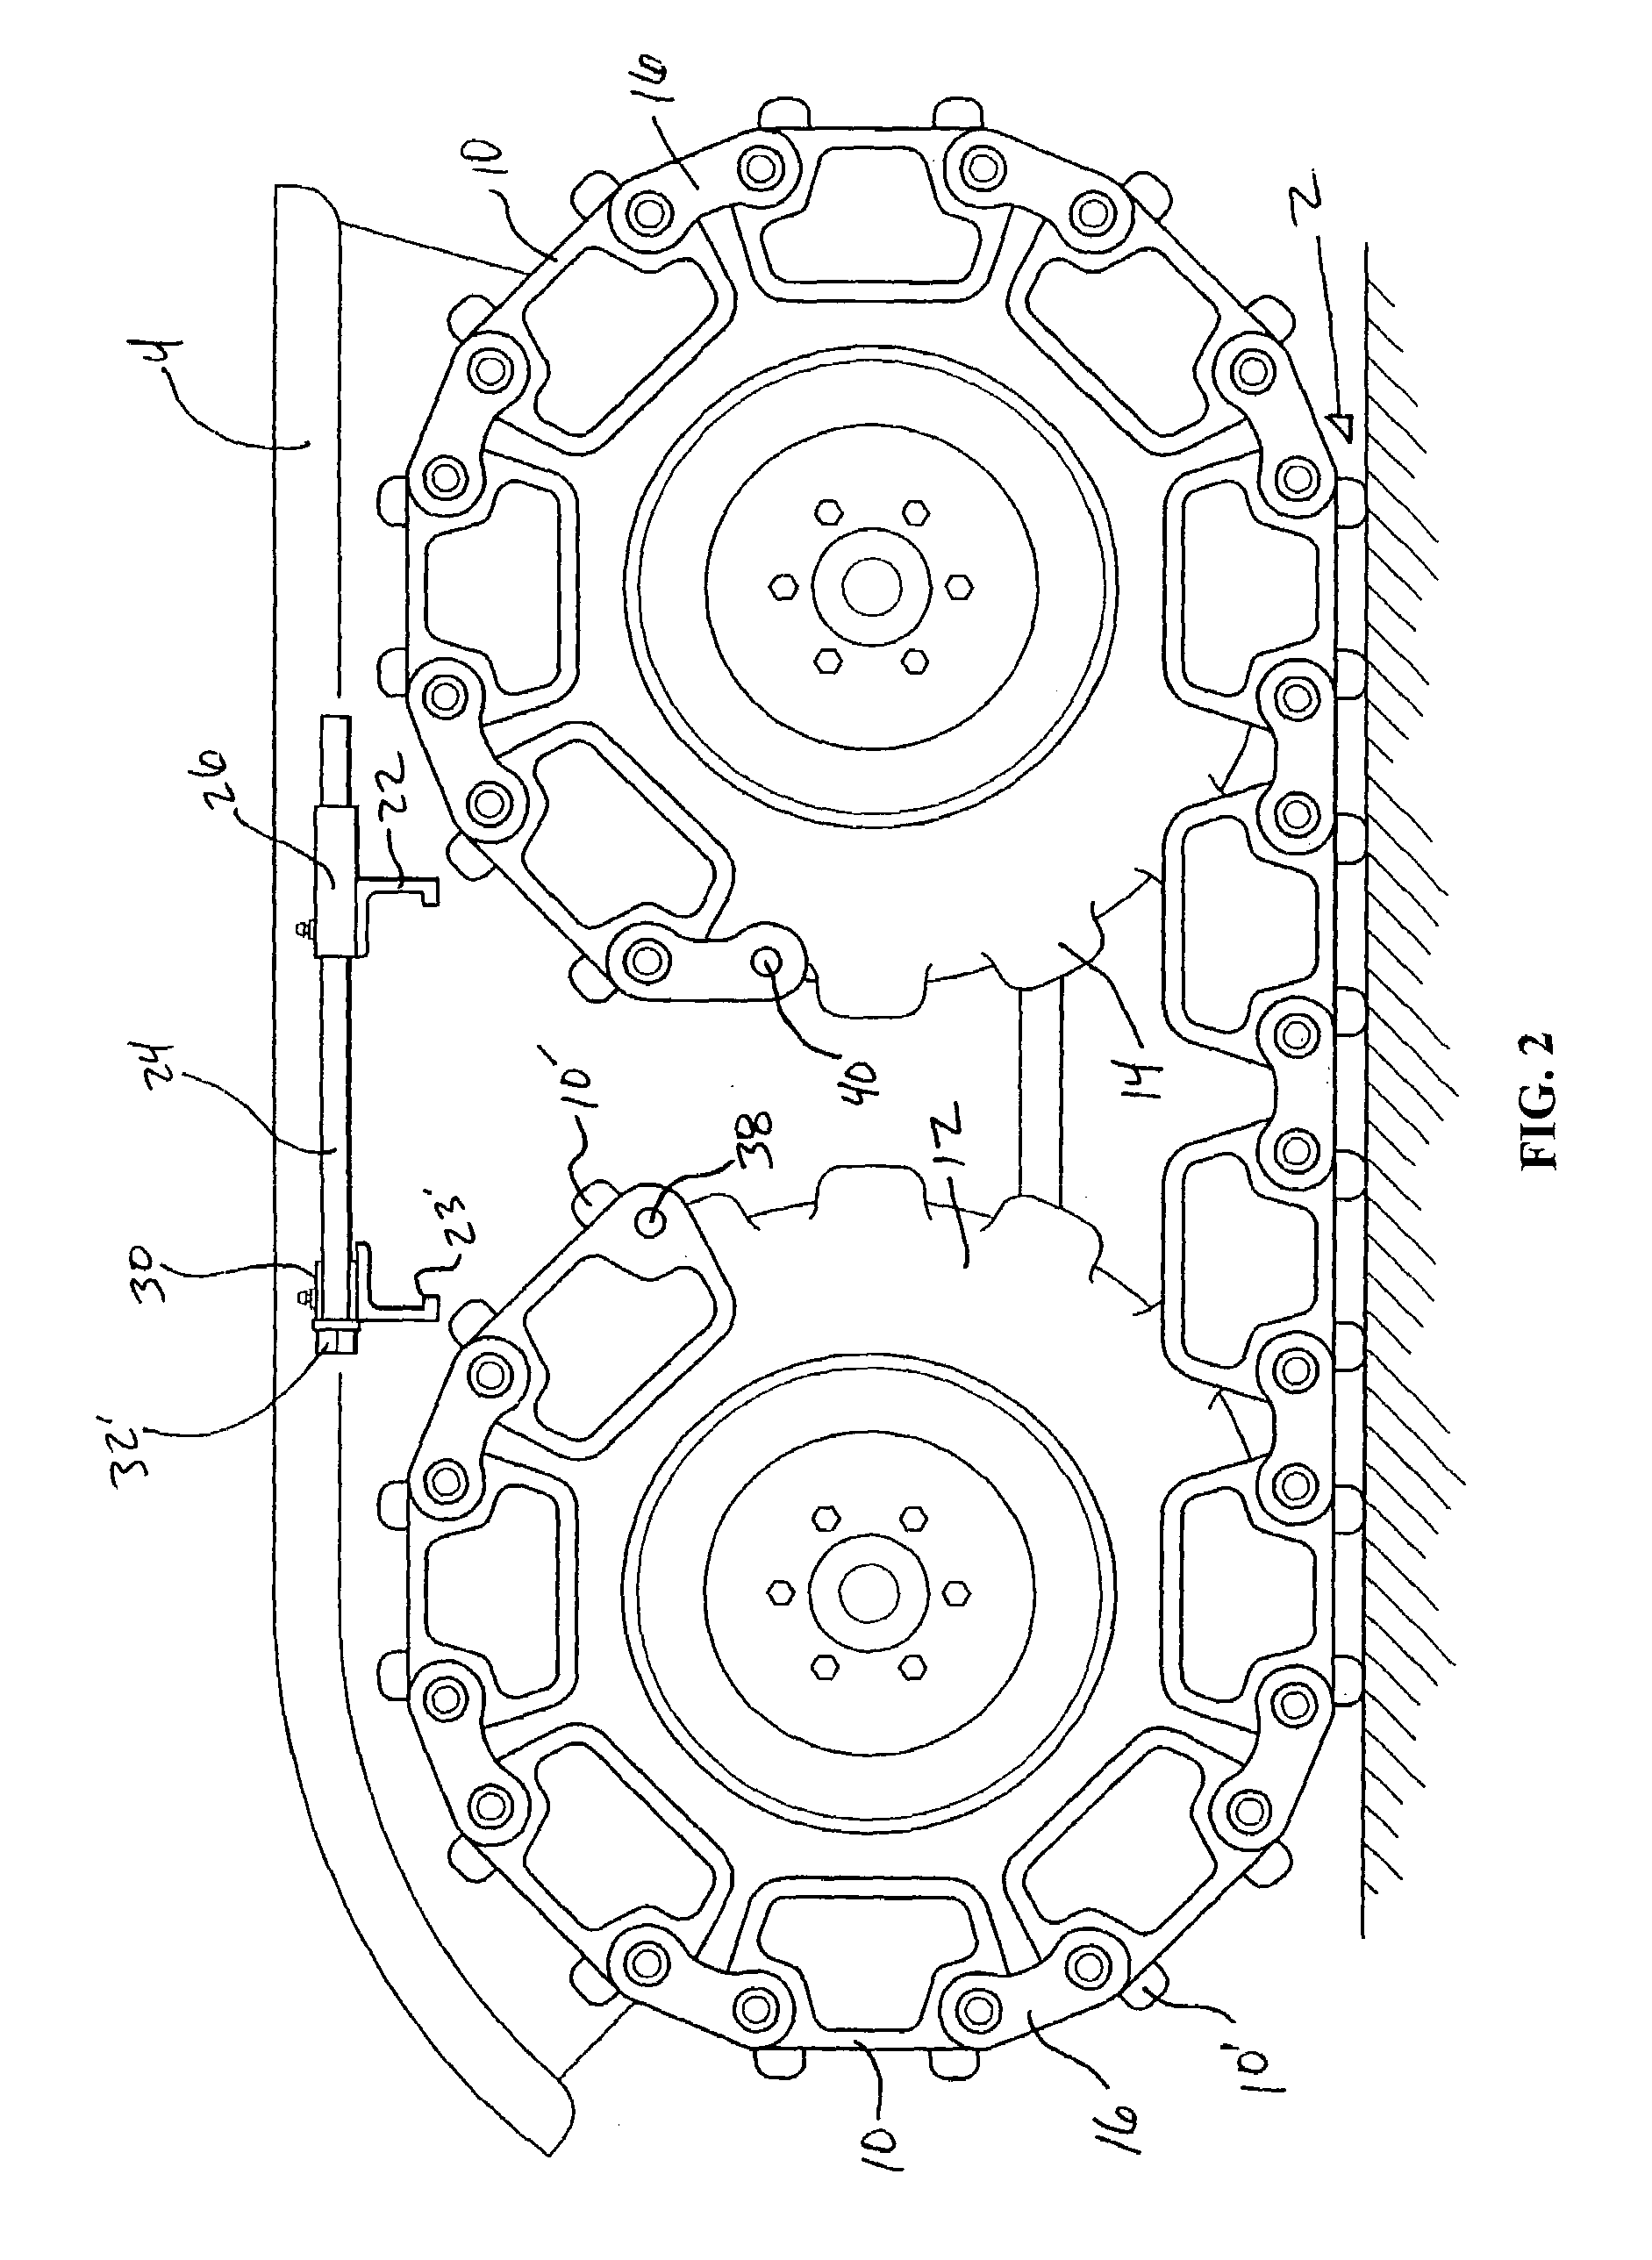 Method and apparatus for installing and tensioning track assemblies on skid steer loaders